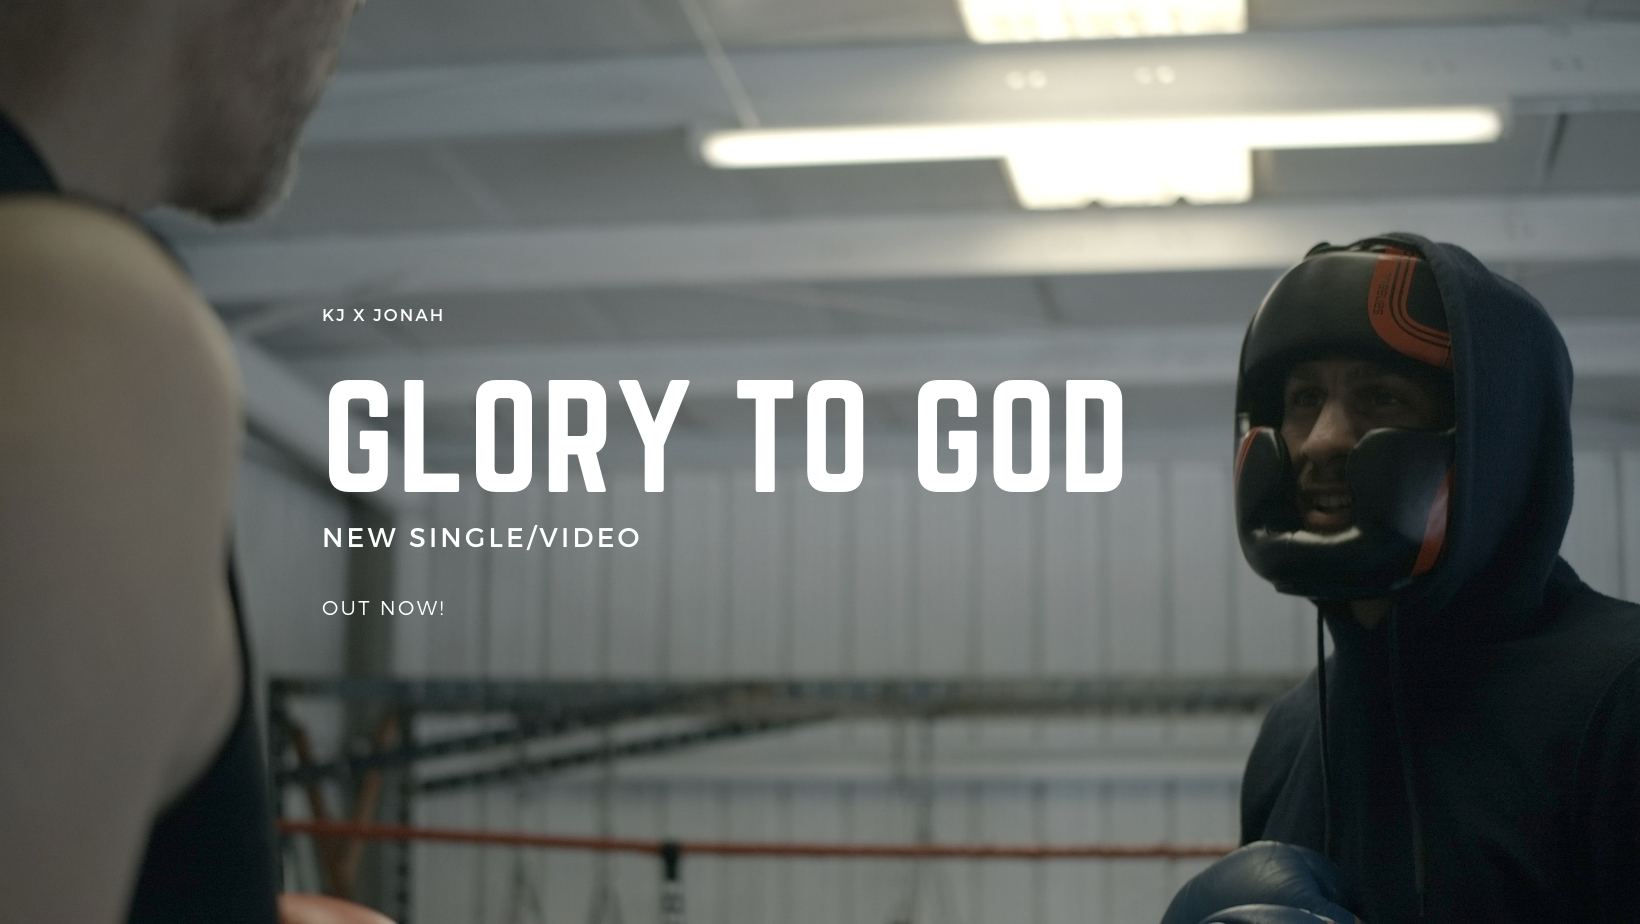 New single/video "Glory to God" out now! 